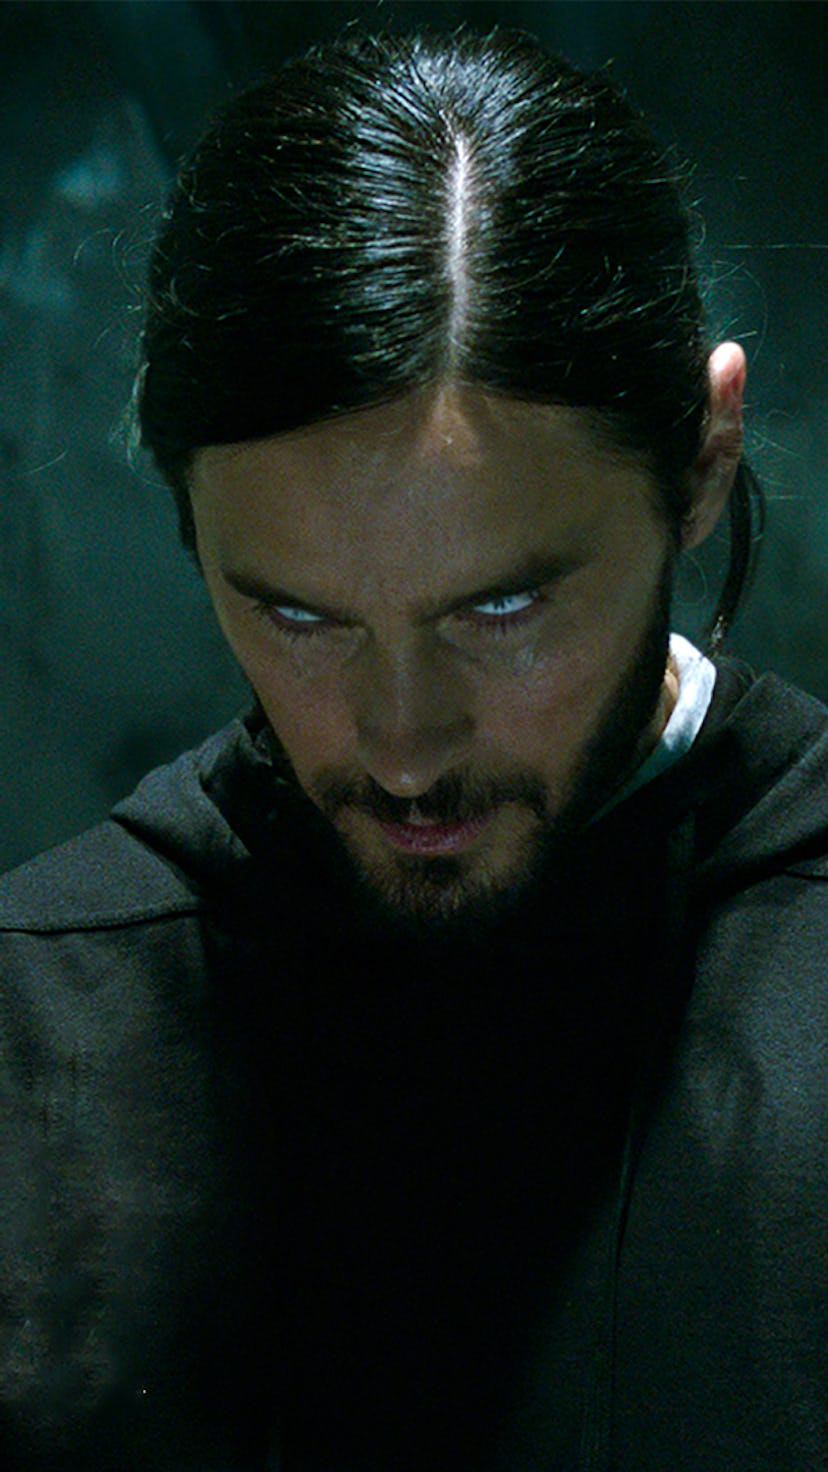 Jared Leto's 'Morbius' got trashed by so many memes from people who didn't like the movie.